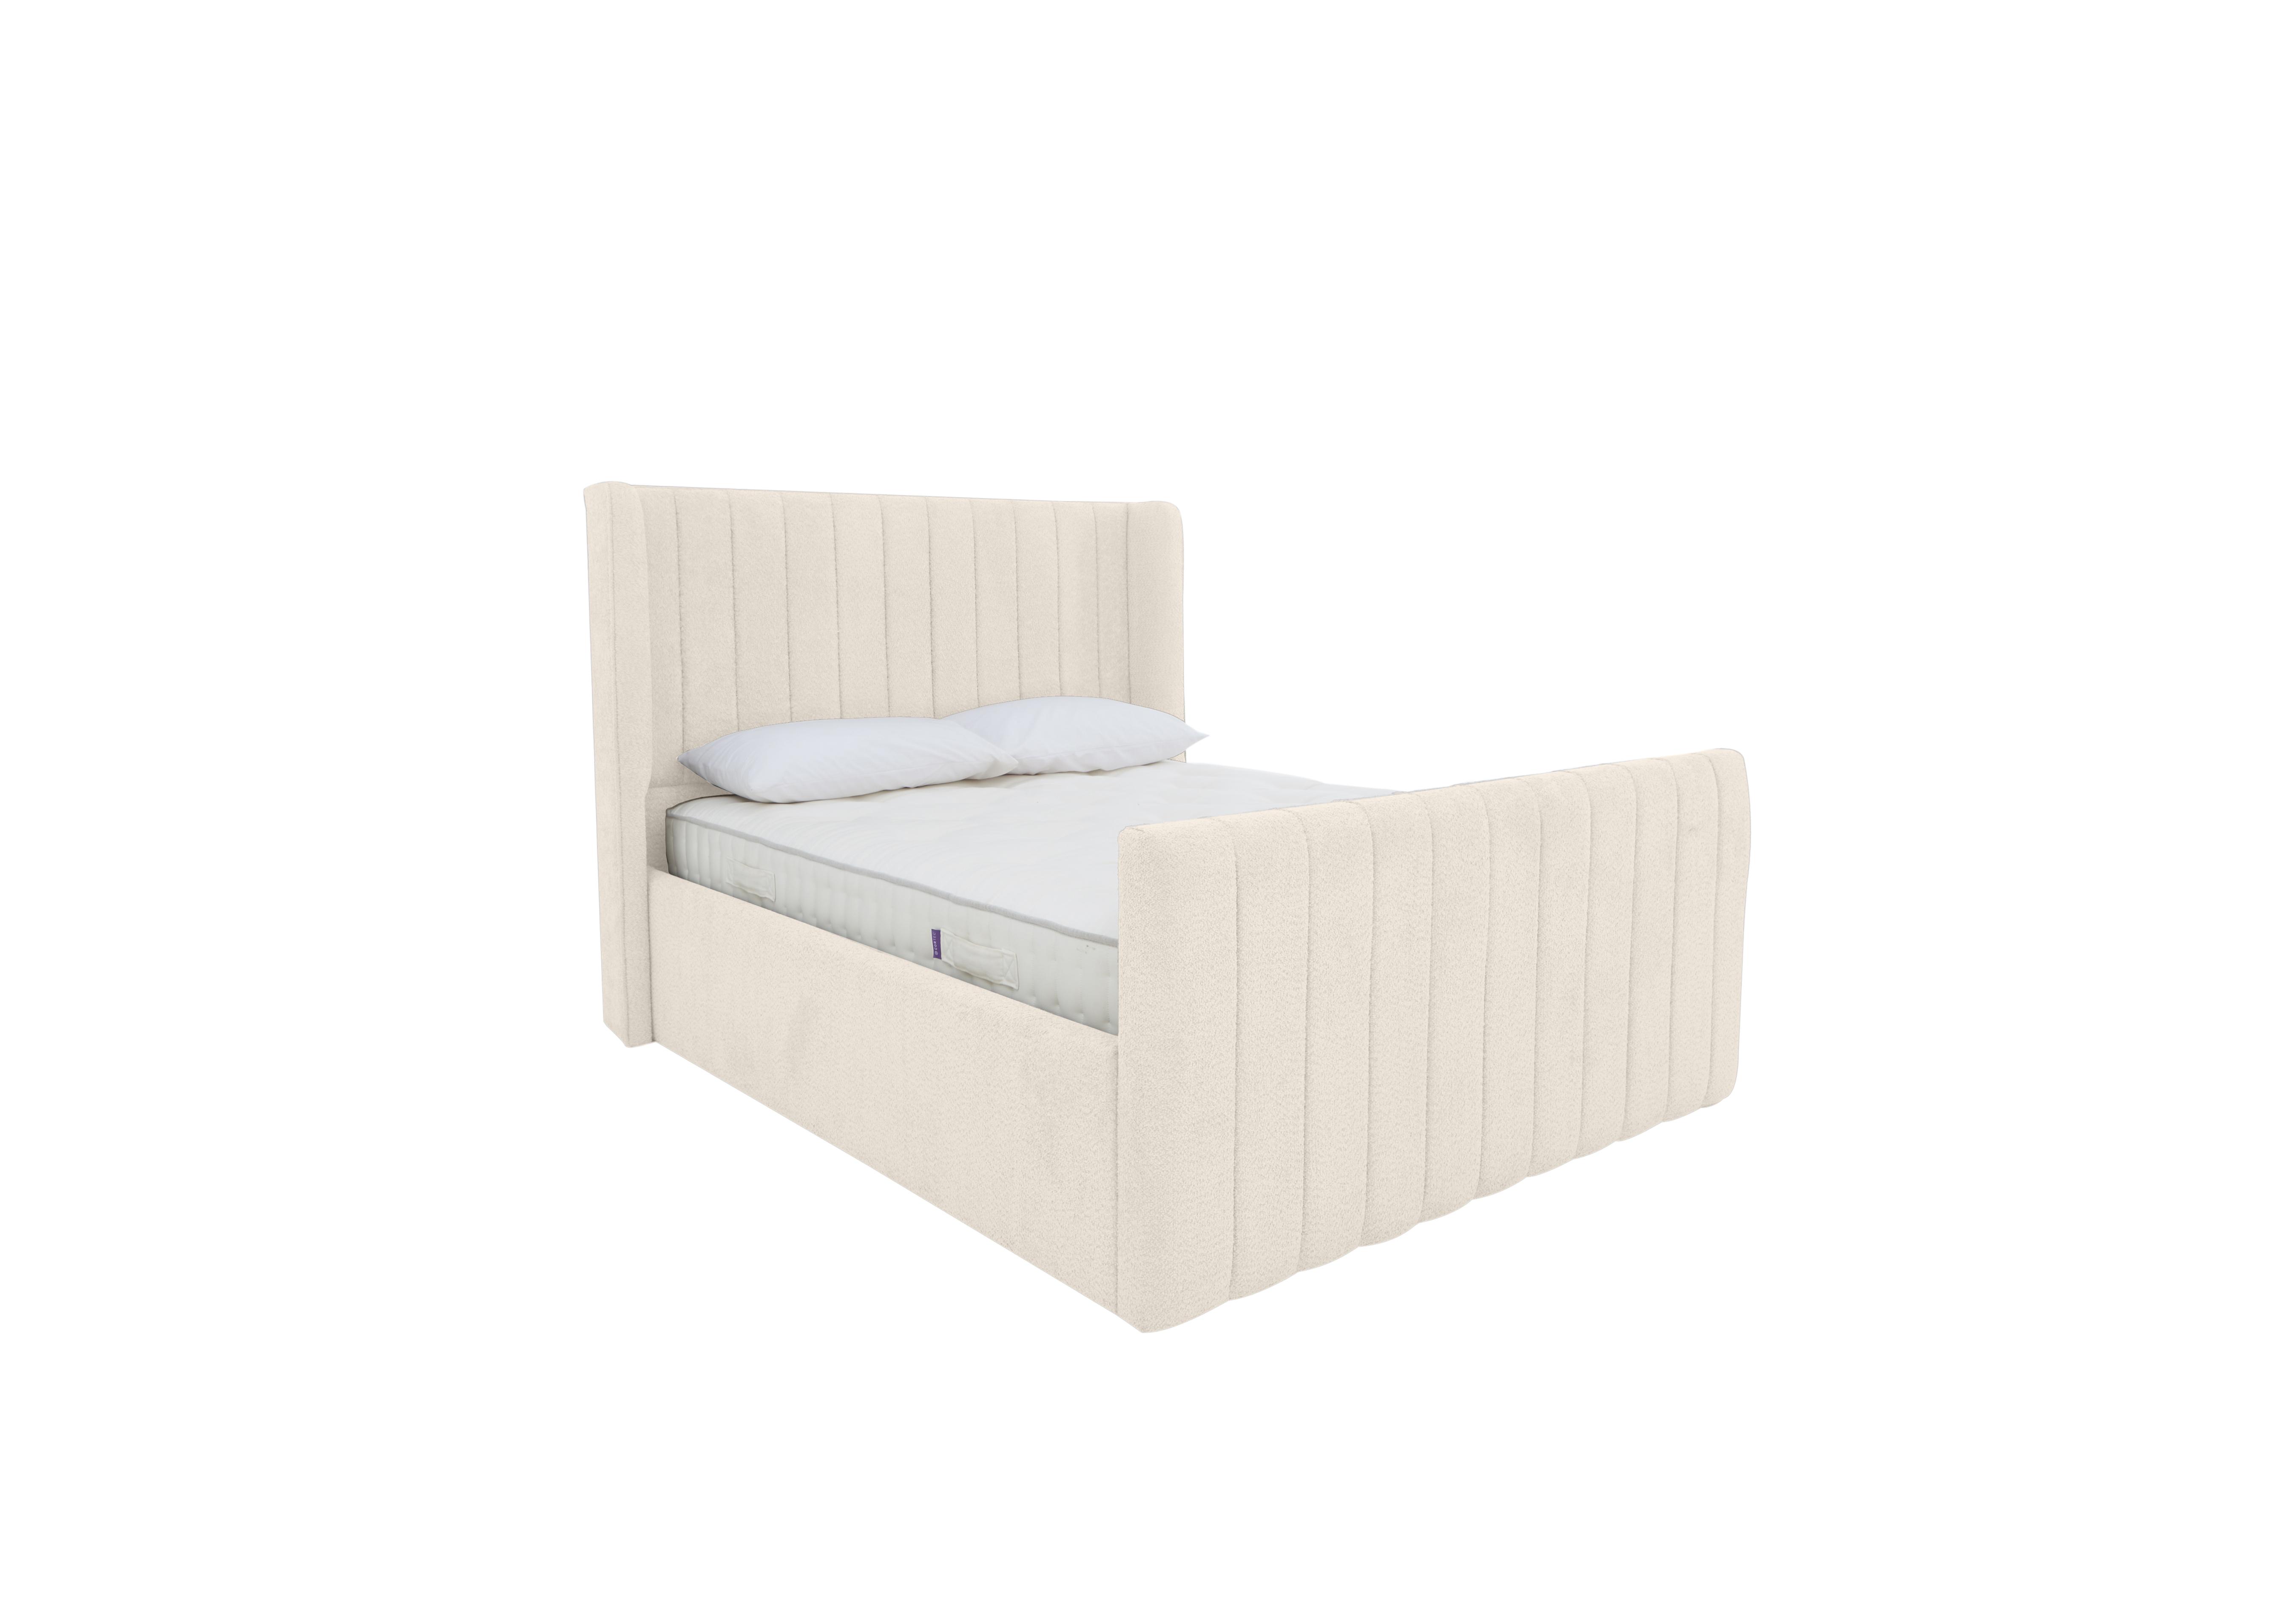 Eira High Foot End Ottoman Bed Frame in Comfy Oat on Furniture Village